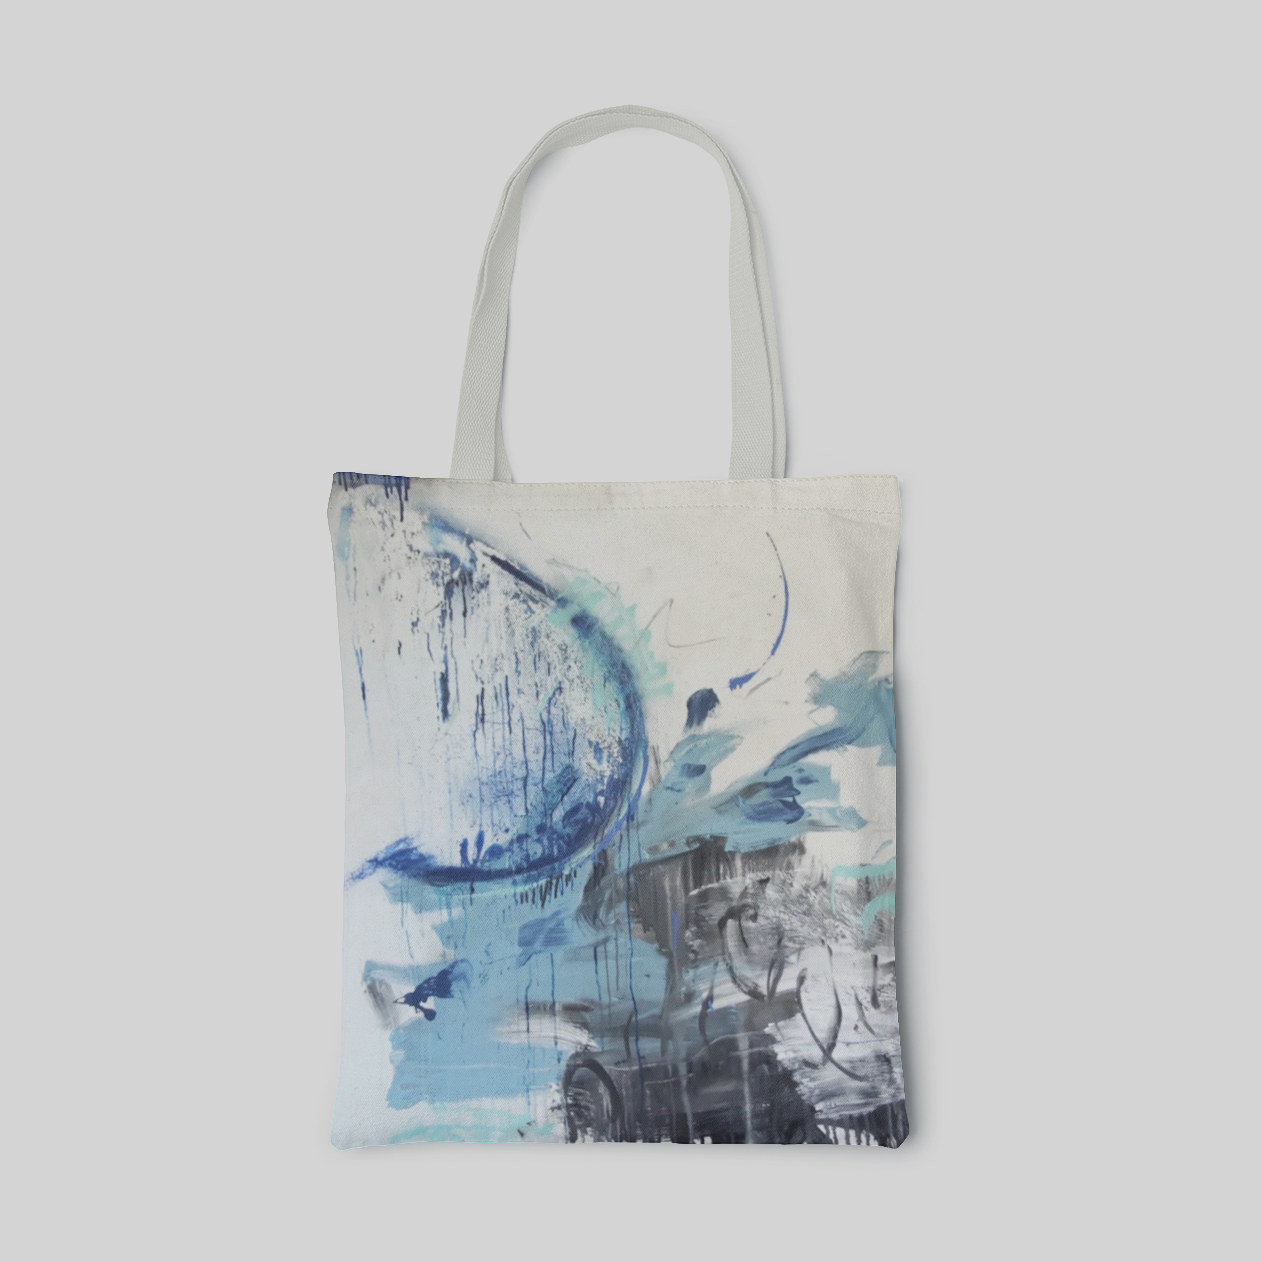 White tote bag with abstract blue and black paint art